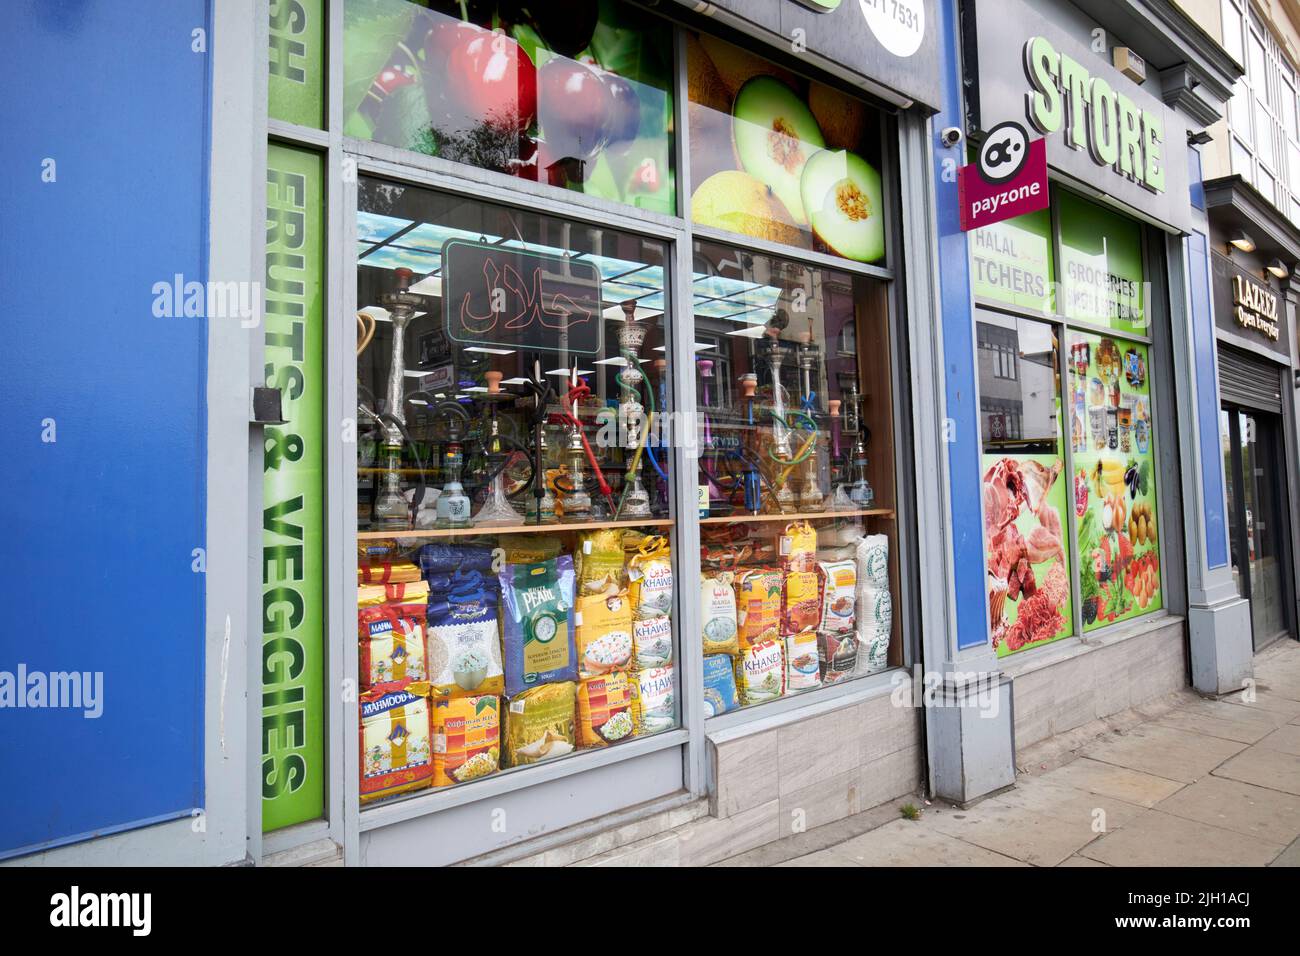 immigrant food stores and shops london road Liverpool England UK Stock Photo